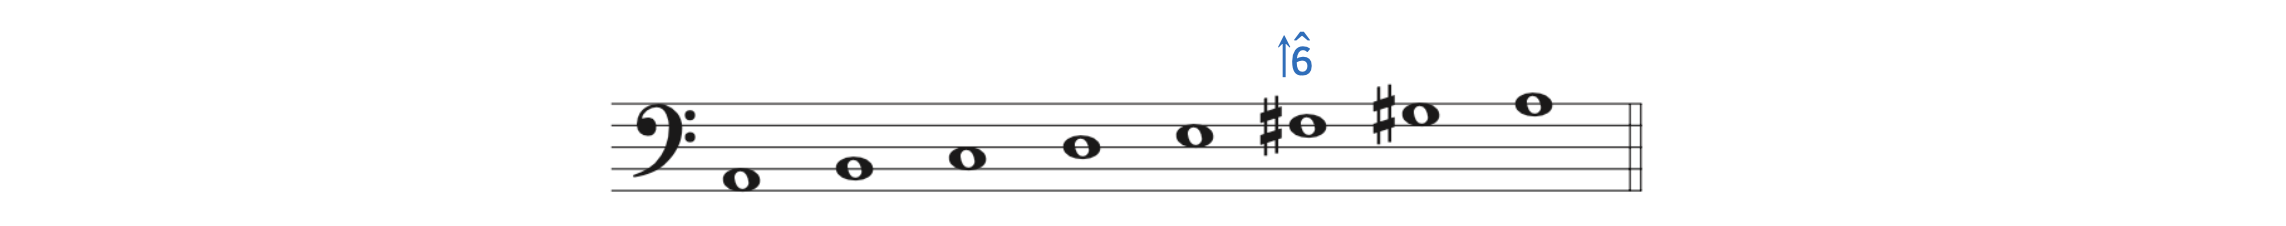 The new scale raises the submediant in order to avoid the large gap between the submediant and the leading tone. This new scale is the melodic minor scale.